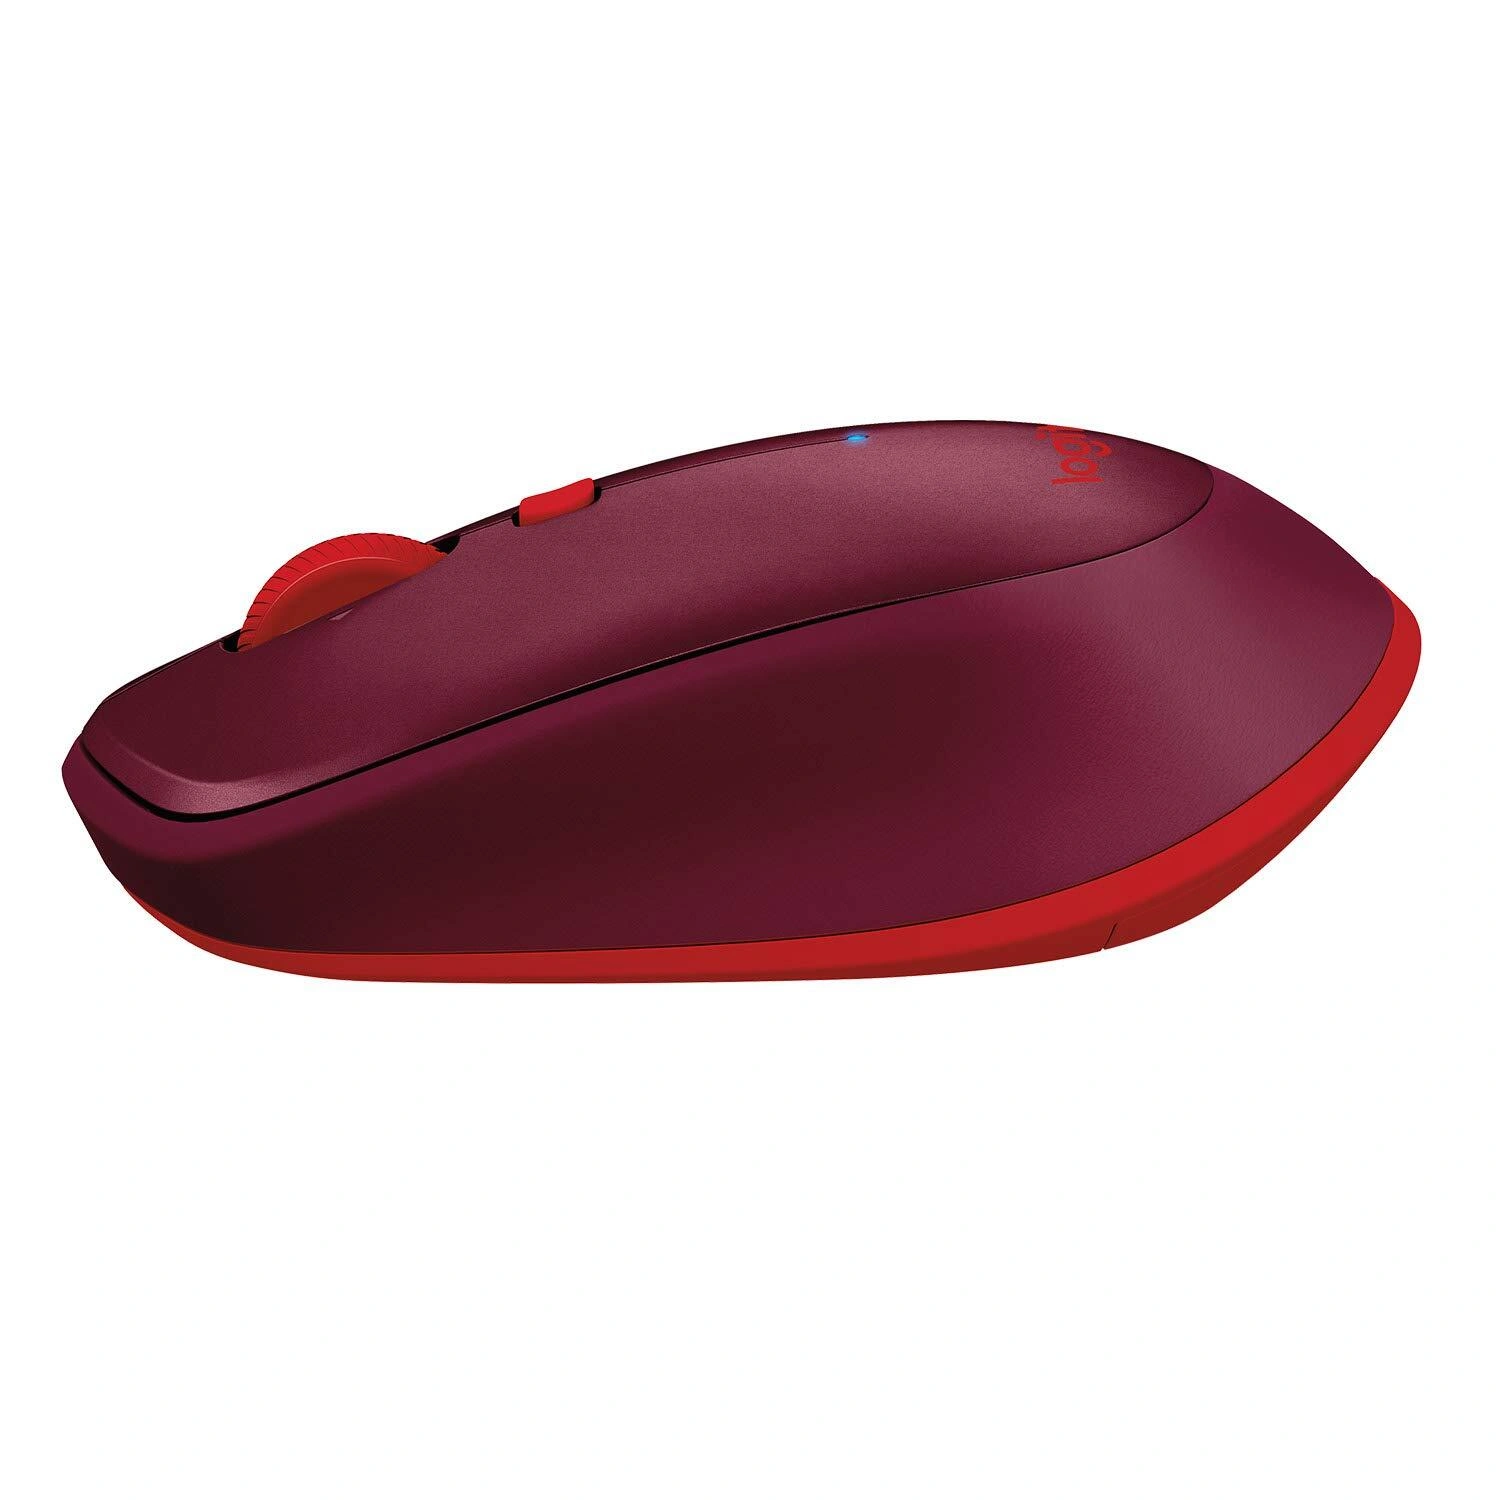 M337
Bluetooth mouse Red-2